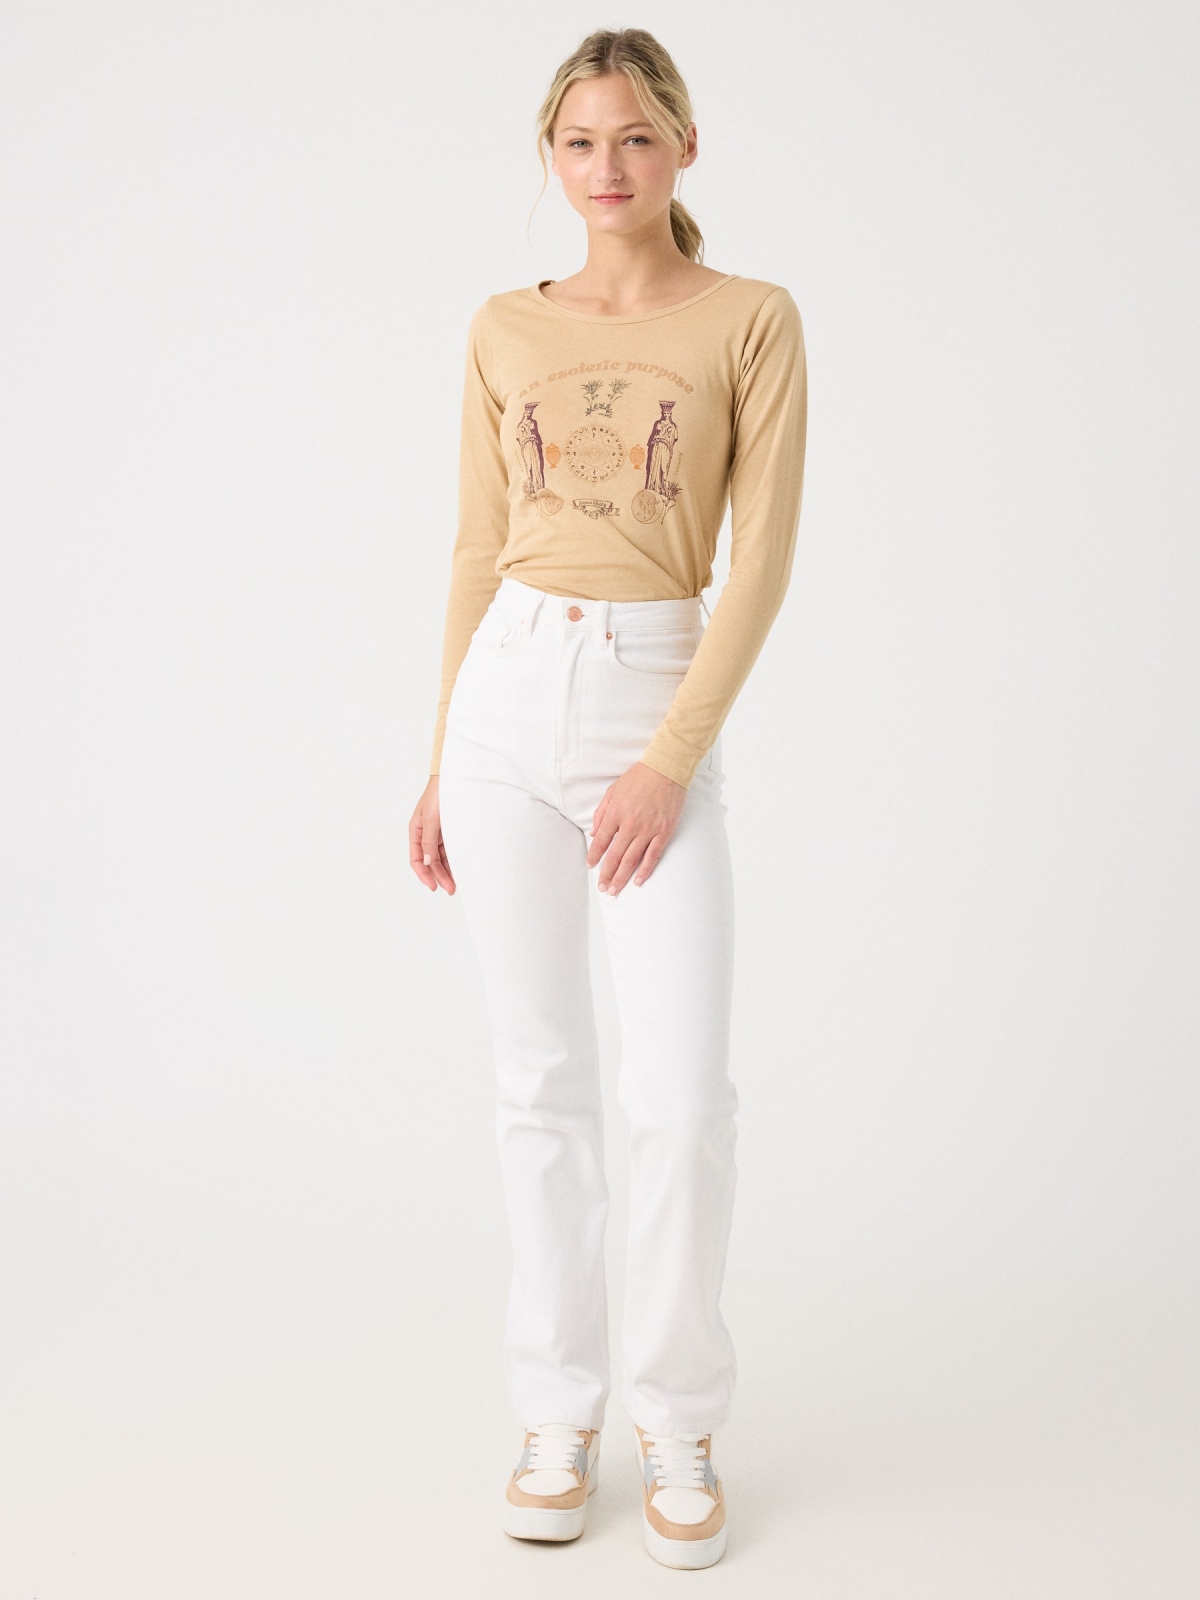 Esoteric print long sleeve t-shirt light brown front view